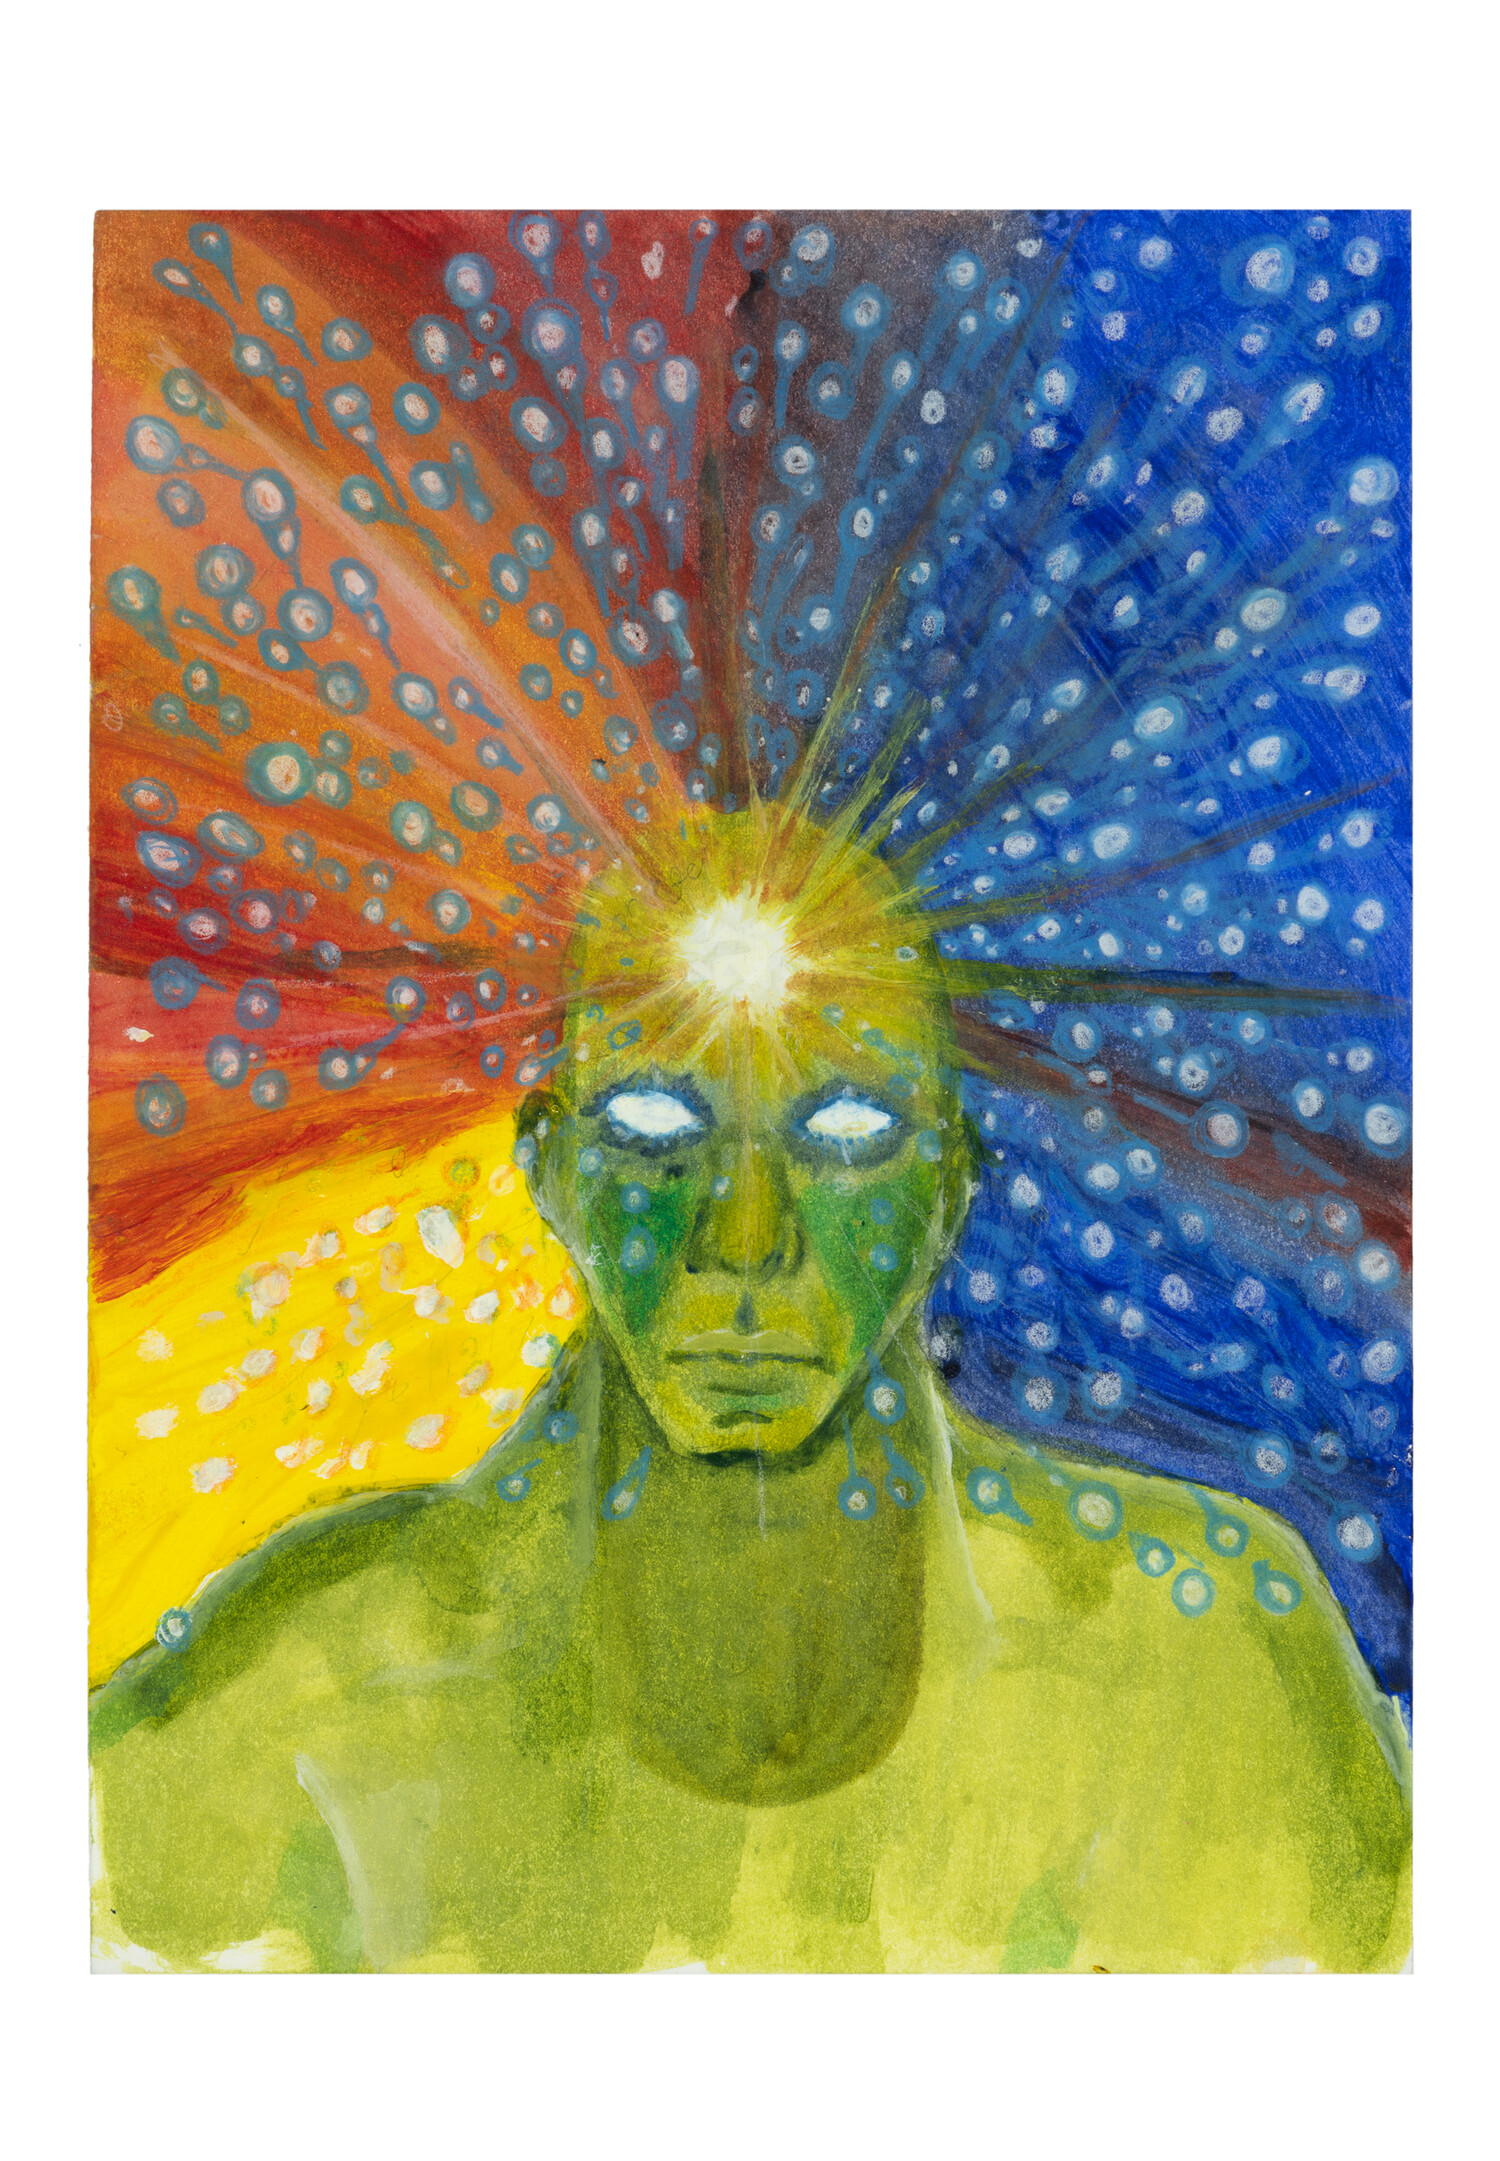 photo of Third Eye Dimension, depicting a green human-like figure with brightly colored rays emanating from a bright spot on its forehead